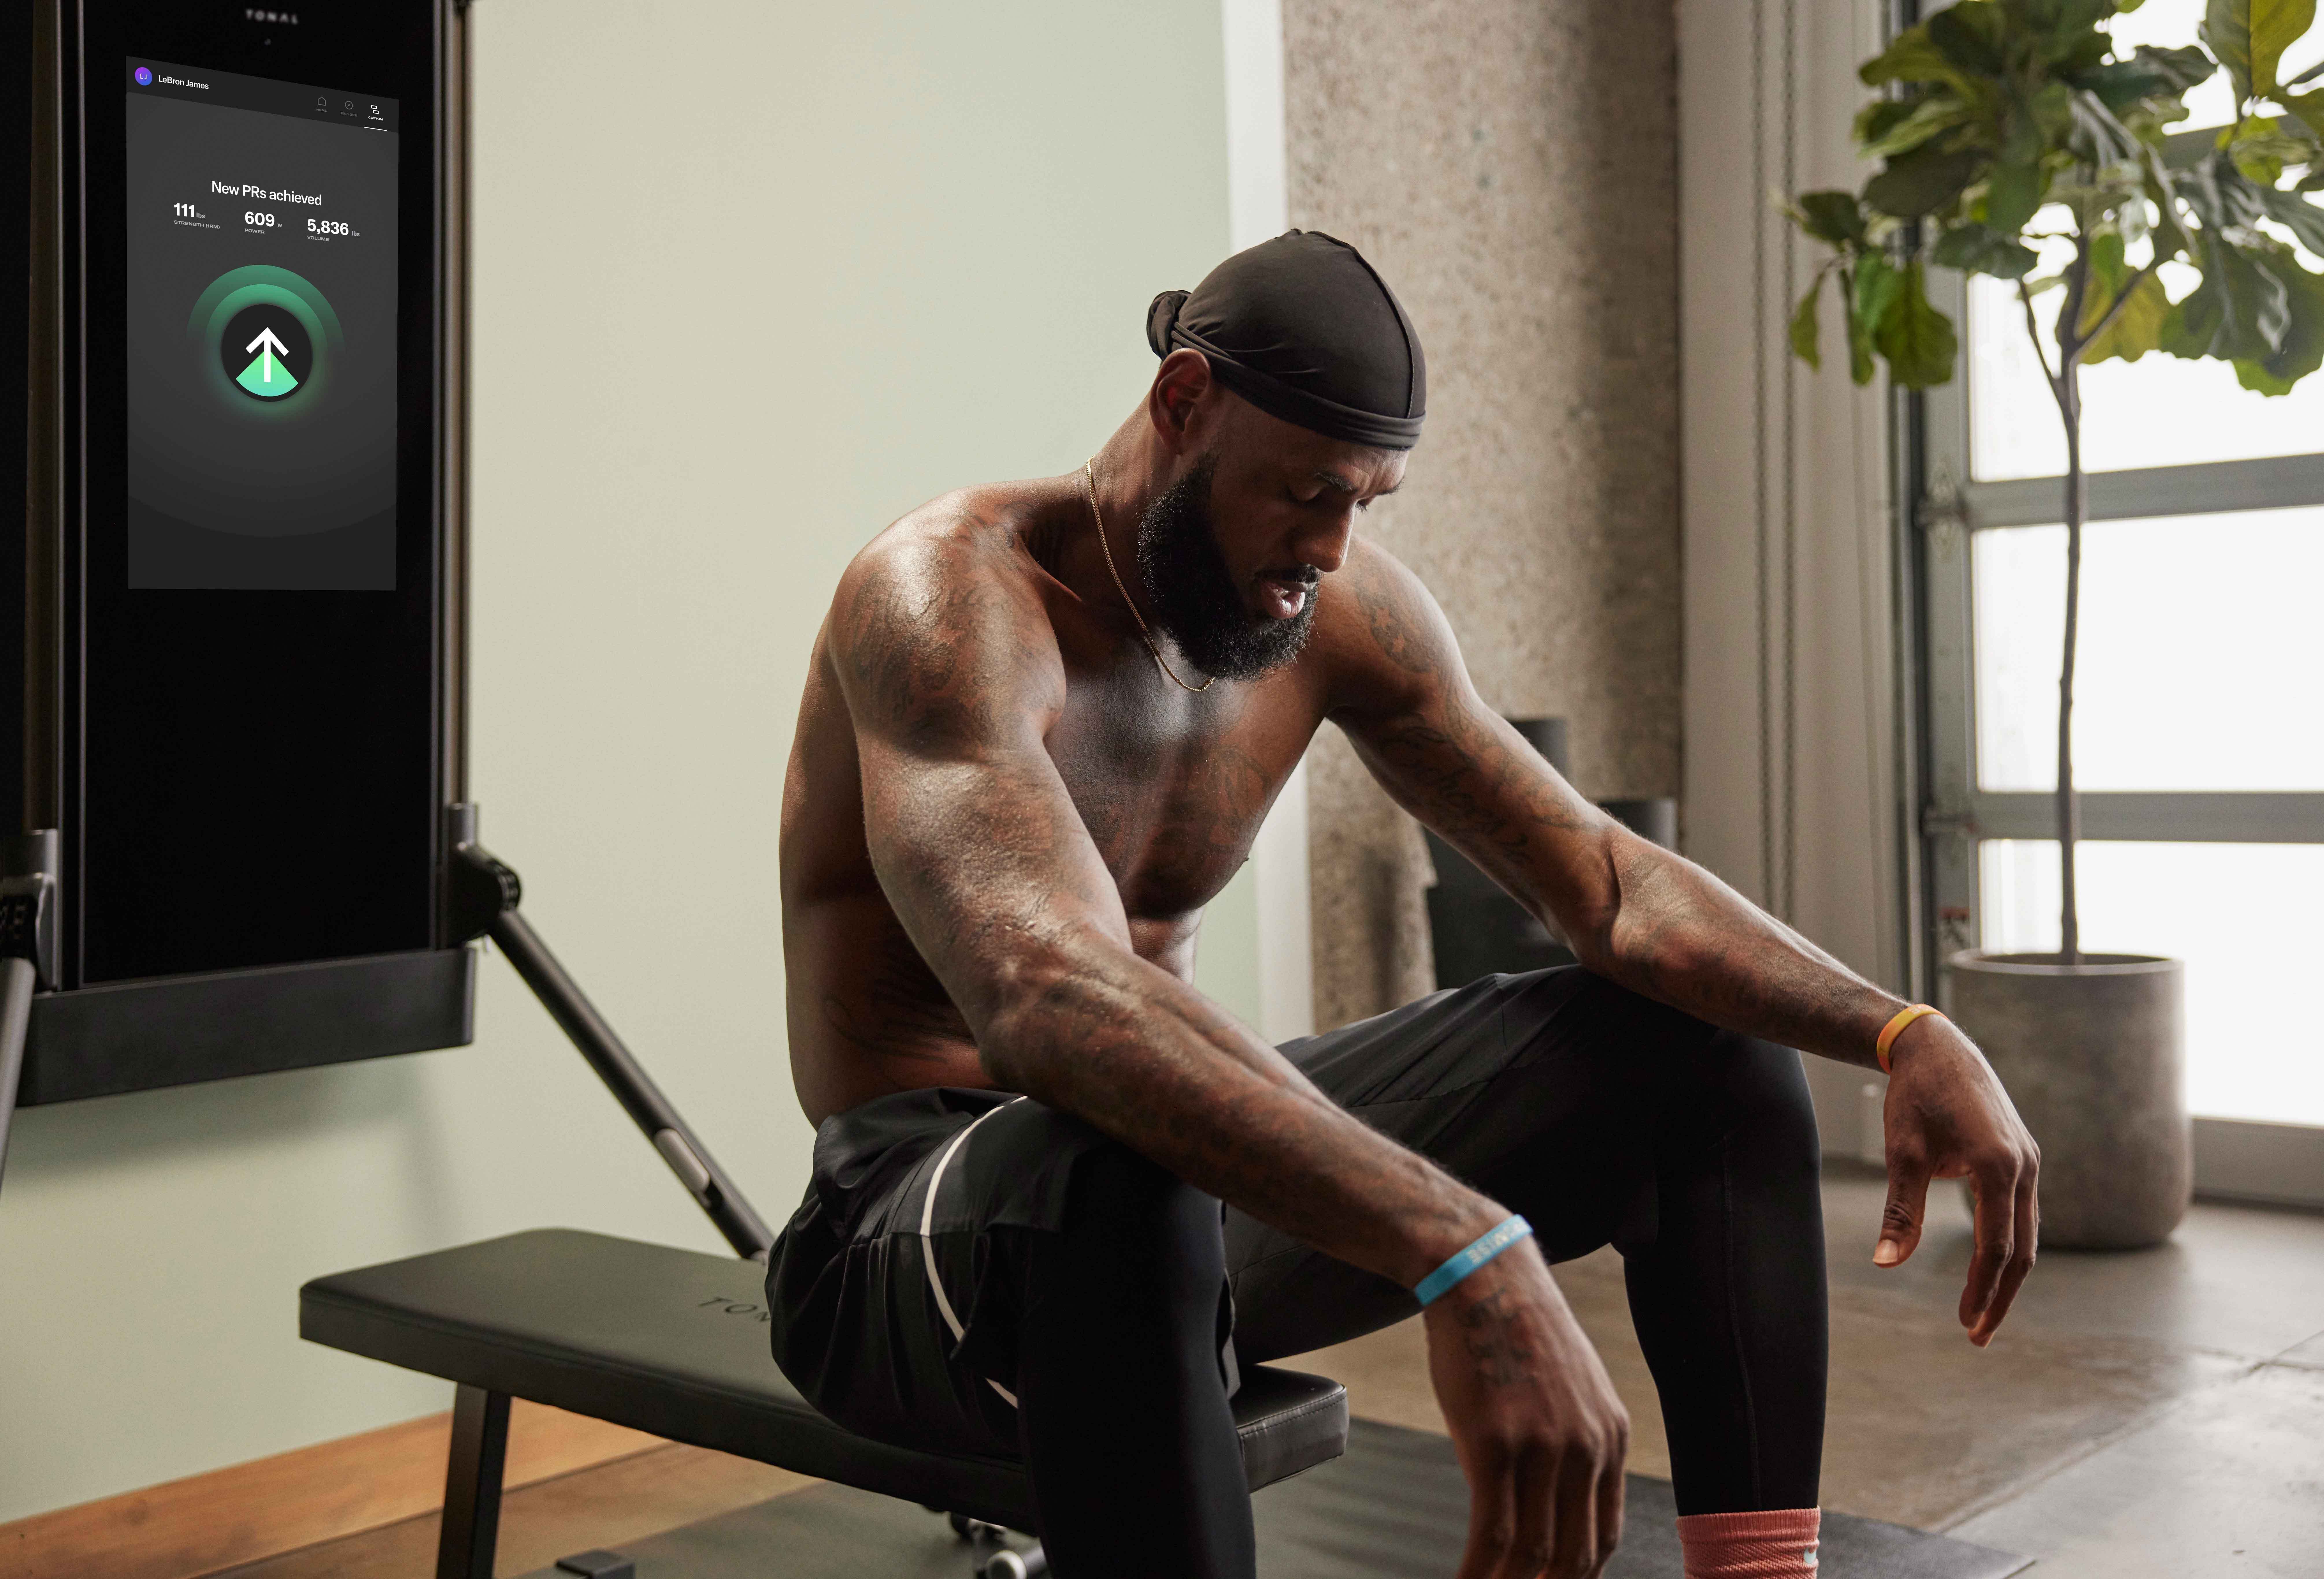 likhoa lebron james and the secret of heavy gym exercises to get in shape like he is now 6523c9e5a448a Lebron James And The Secret Of Heavy Gym Exercises To Get In Shape Like He Is Now